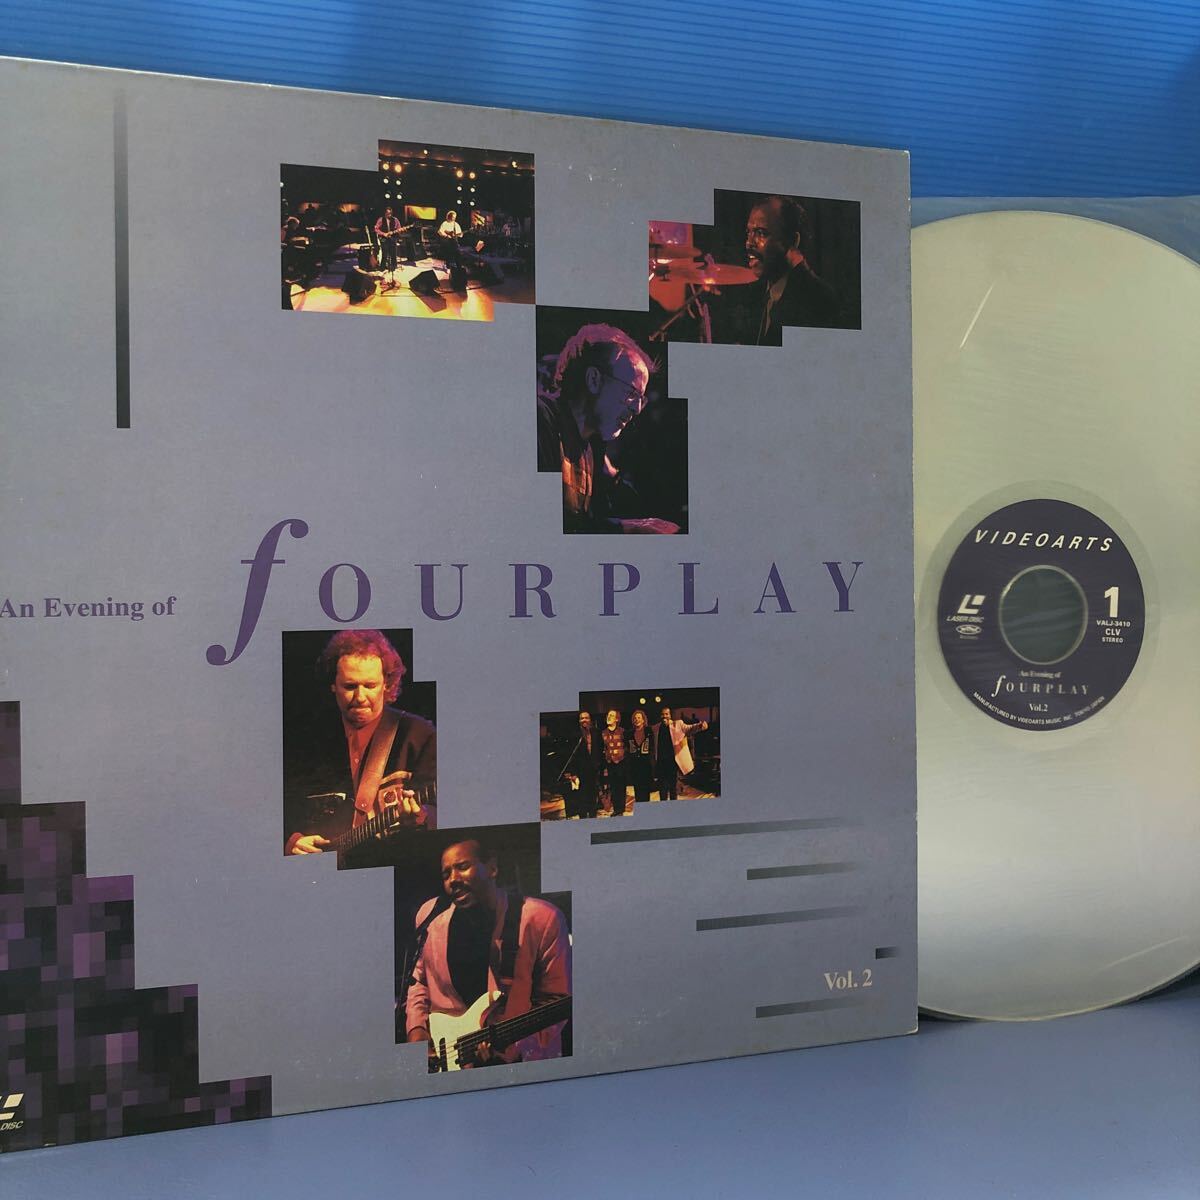 i LD laser disk four Play An Evening of fOURPLAY Vol.2 LP record 5 point and more successful bid free shipping 